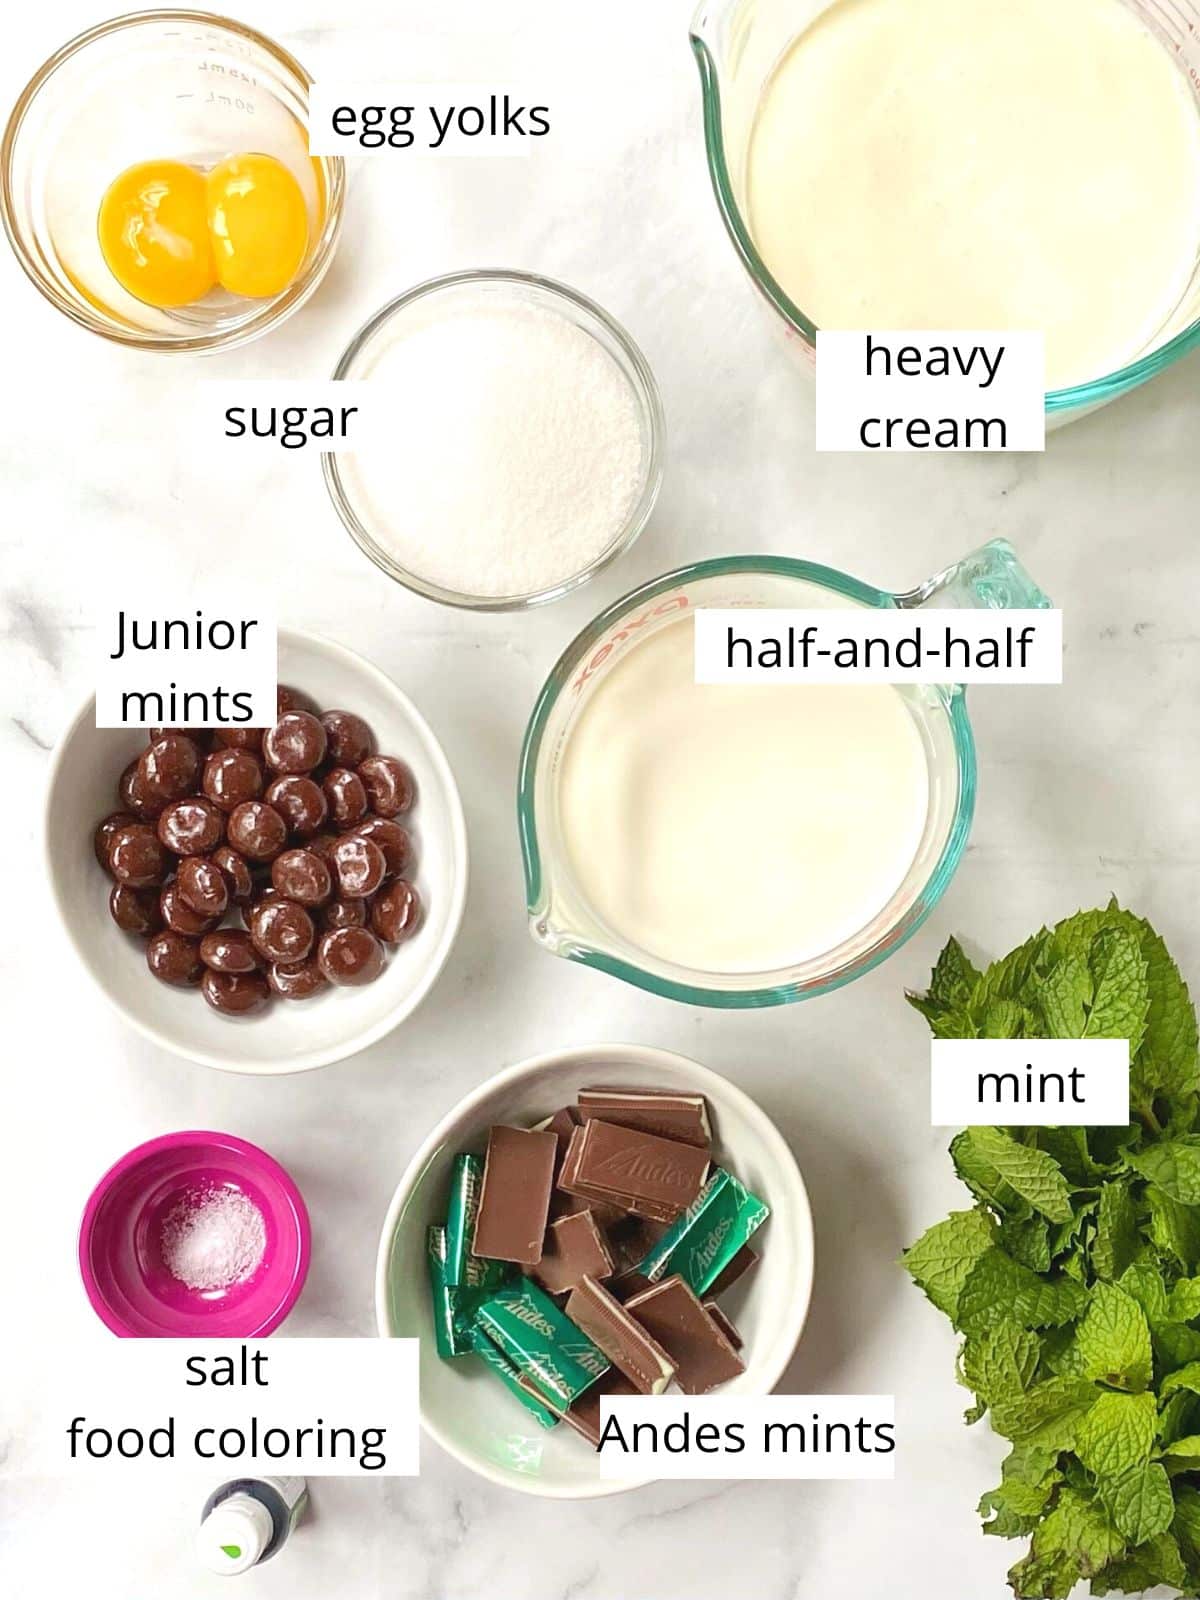 ingredients for triple mint ice cream.